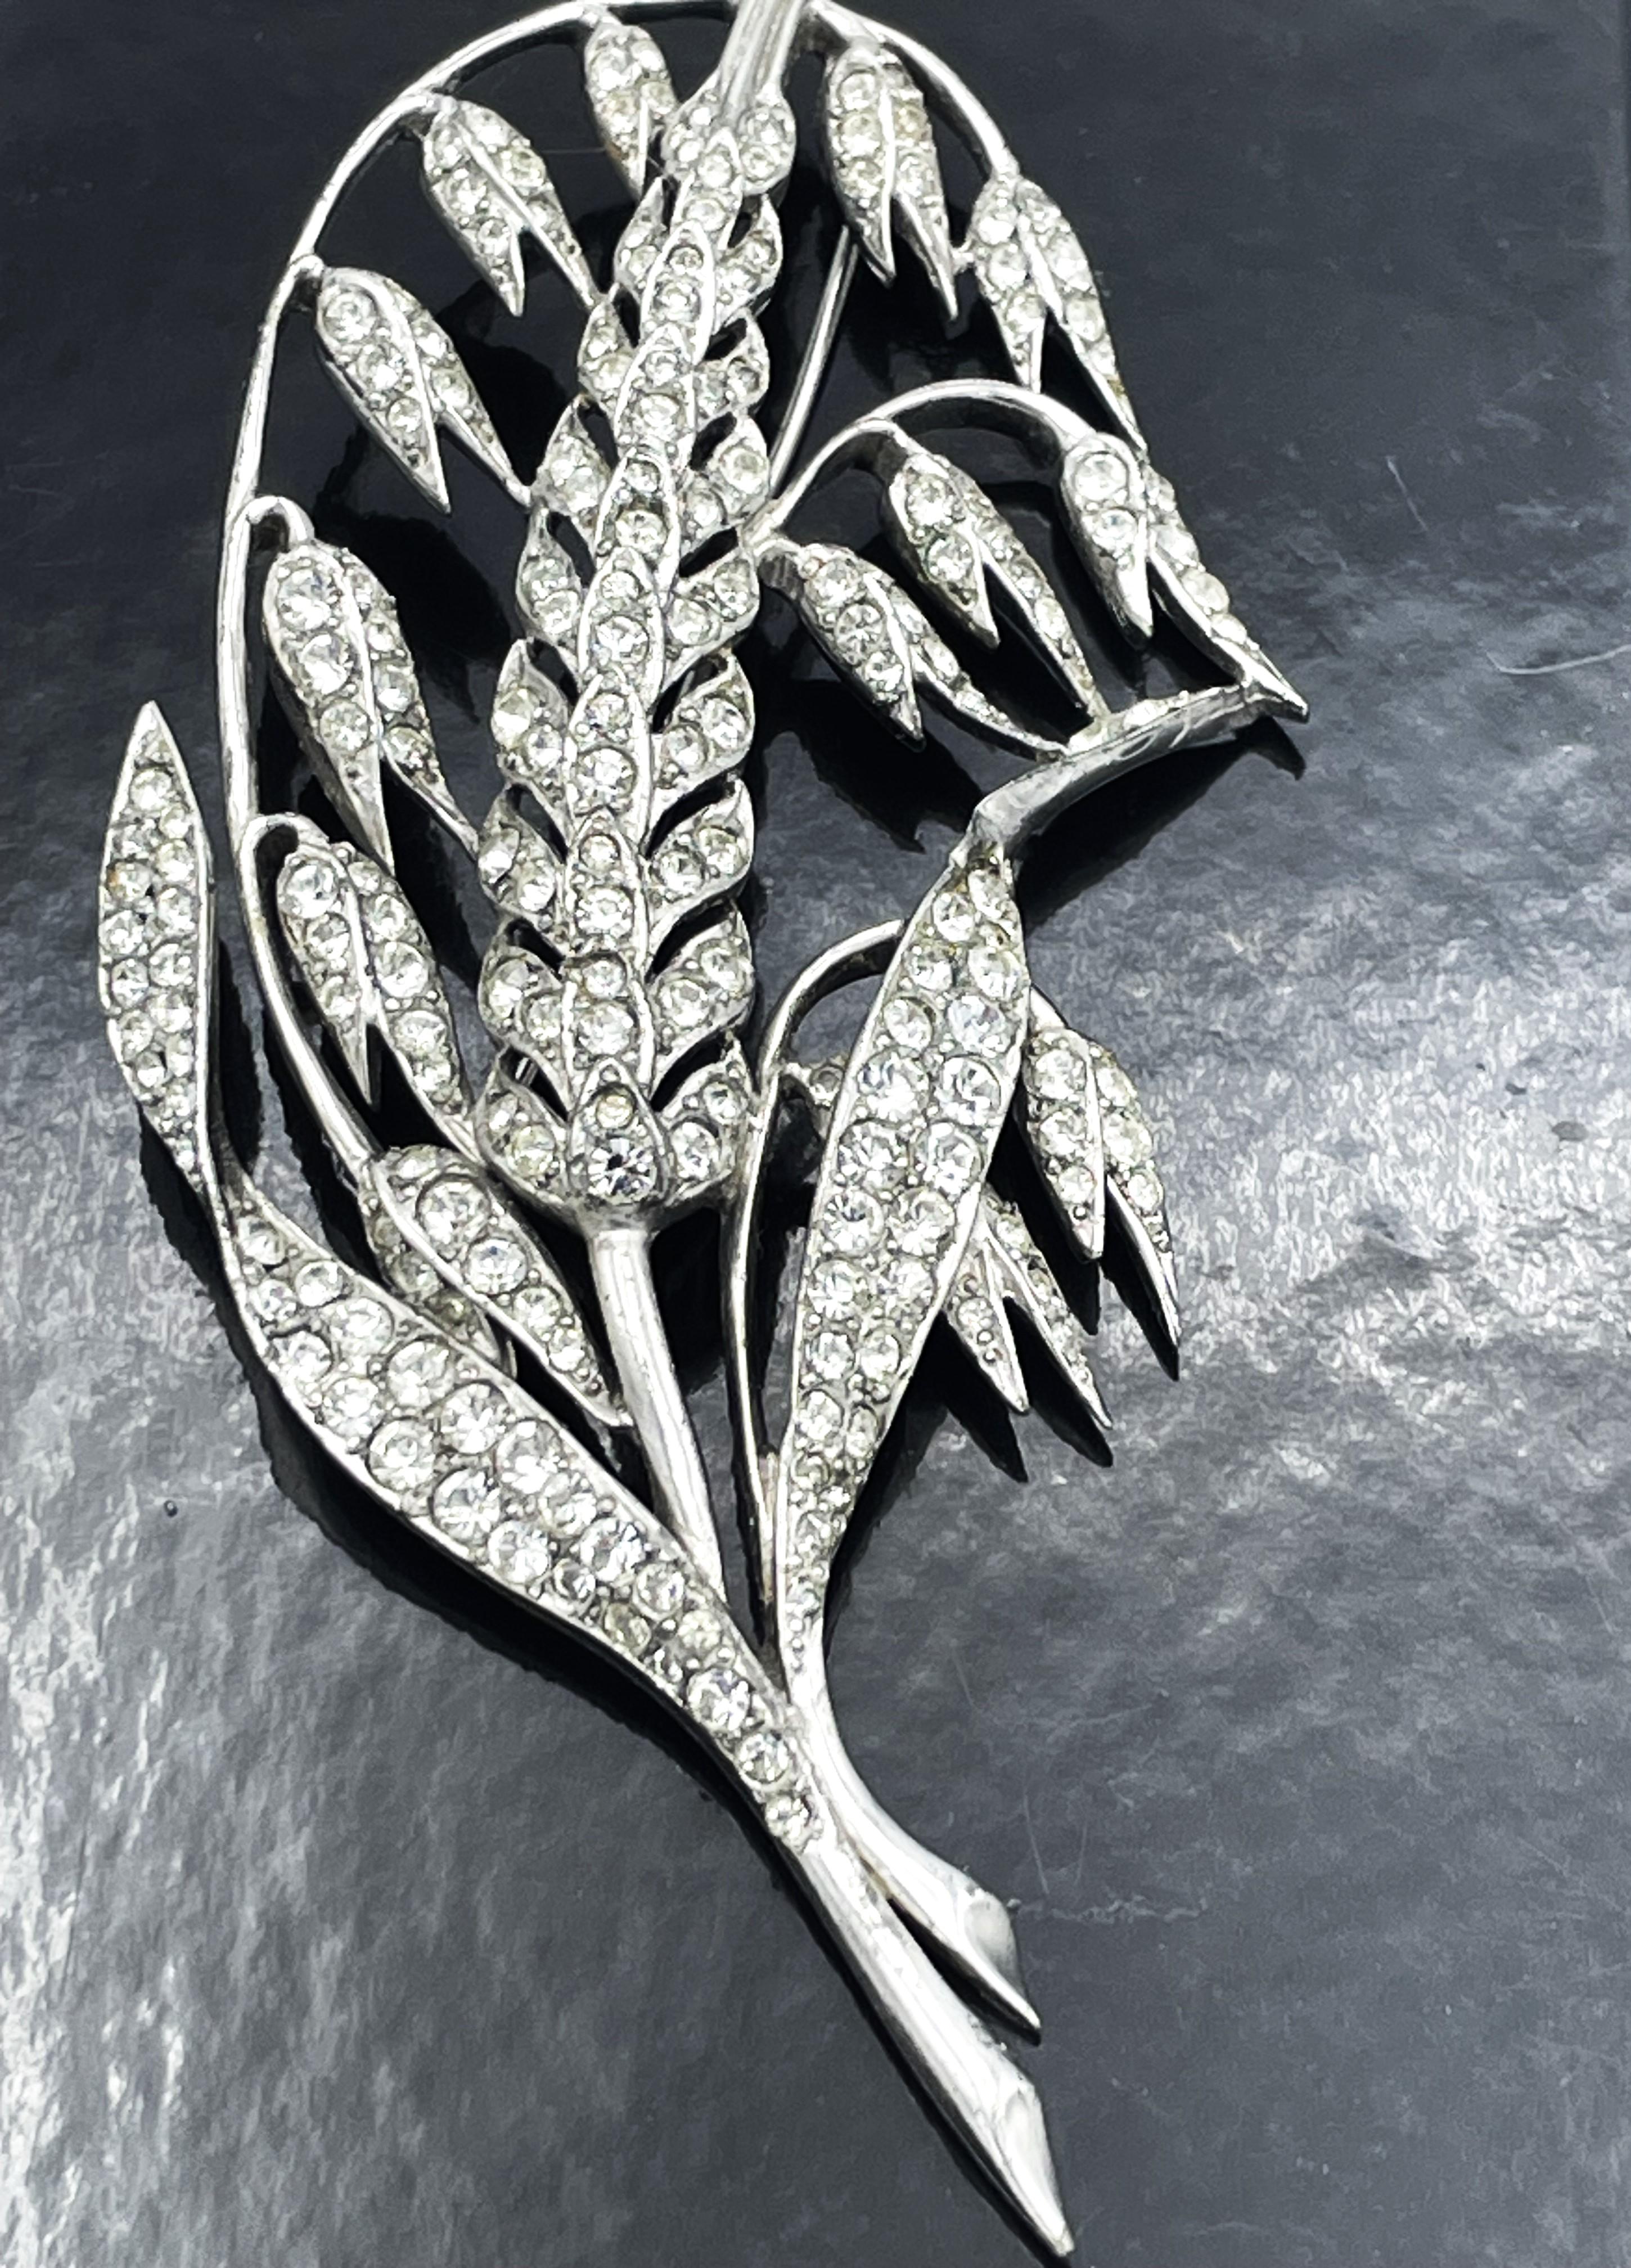 M. BOUCHER SHEAF-OF-WHEAT BROOCH, Rhodium plated, rhinestones pavé, 1940's USA In Excellent Condition For Sale In Stuttgart, DE